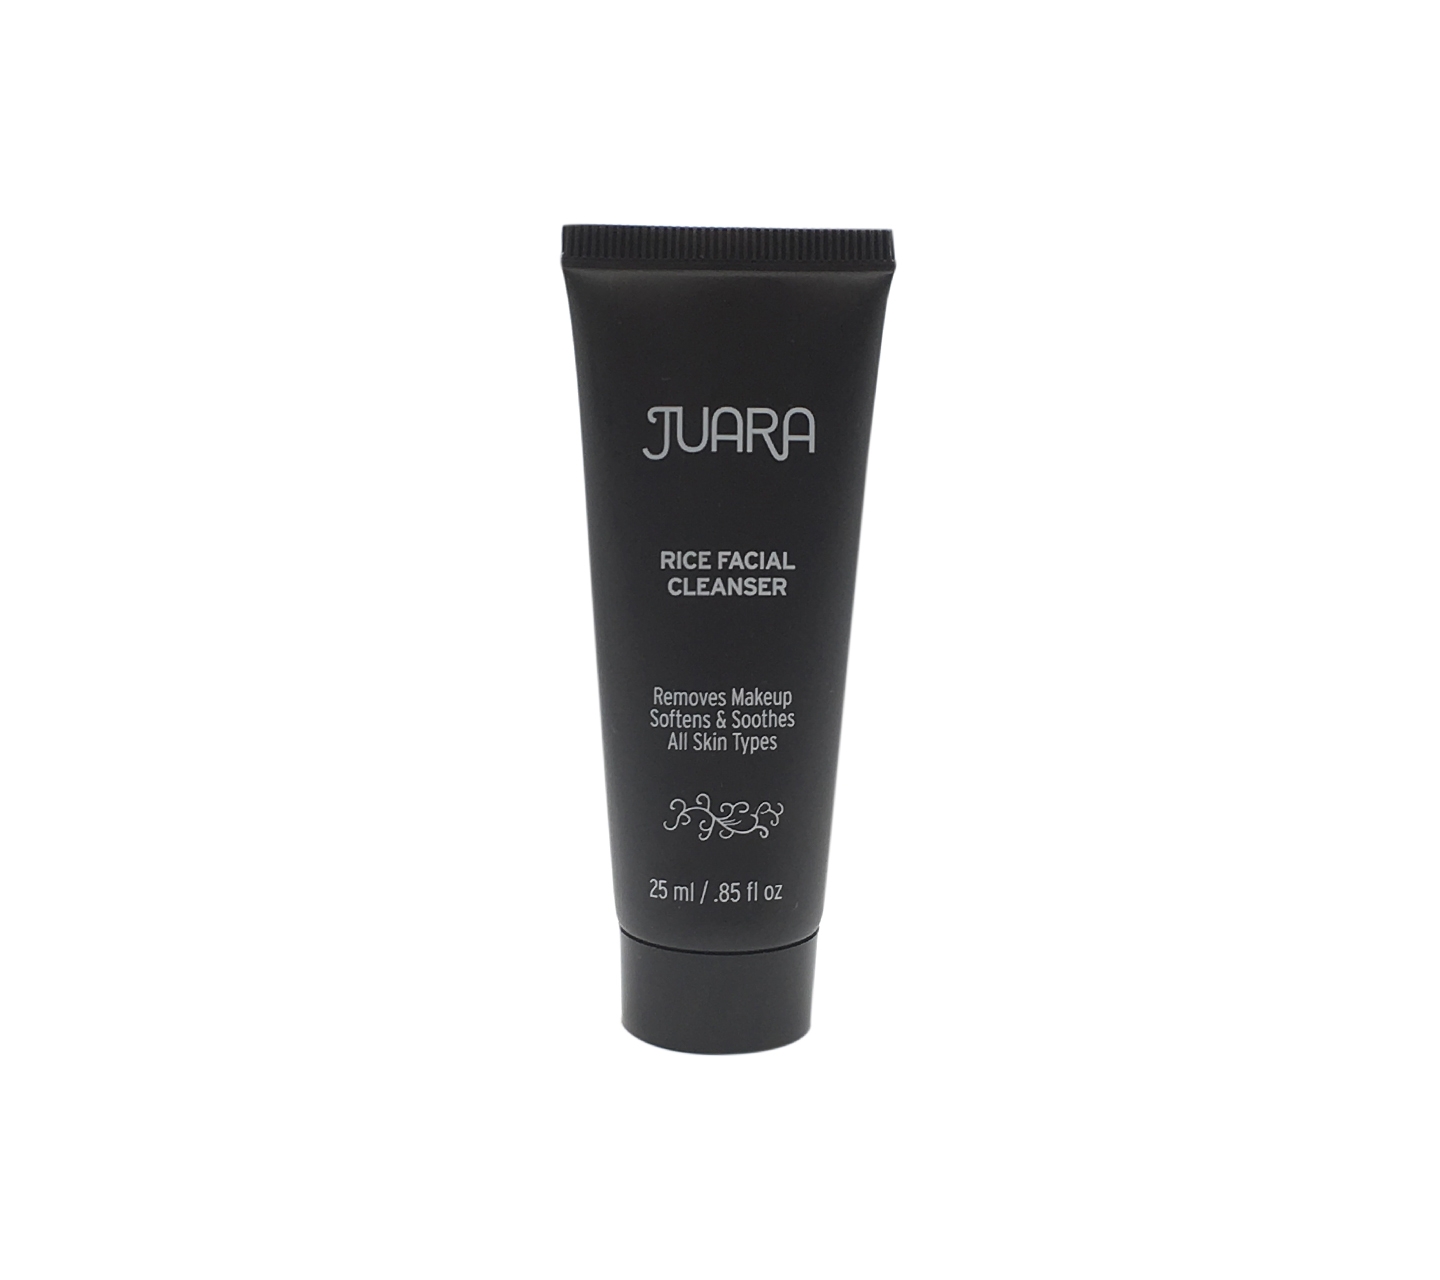 Juara Rice Facial Cleanser Removes Makeuo Softens & Soothes Skin Care